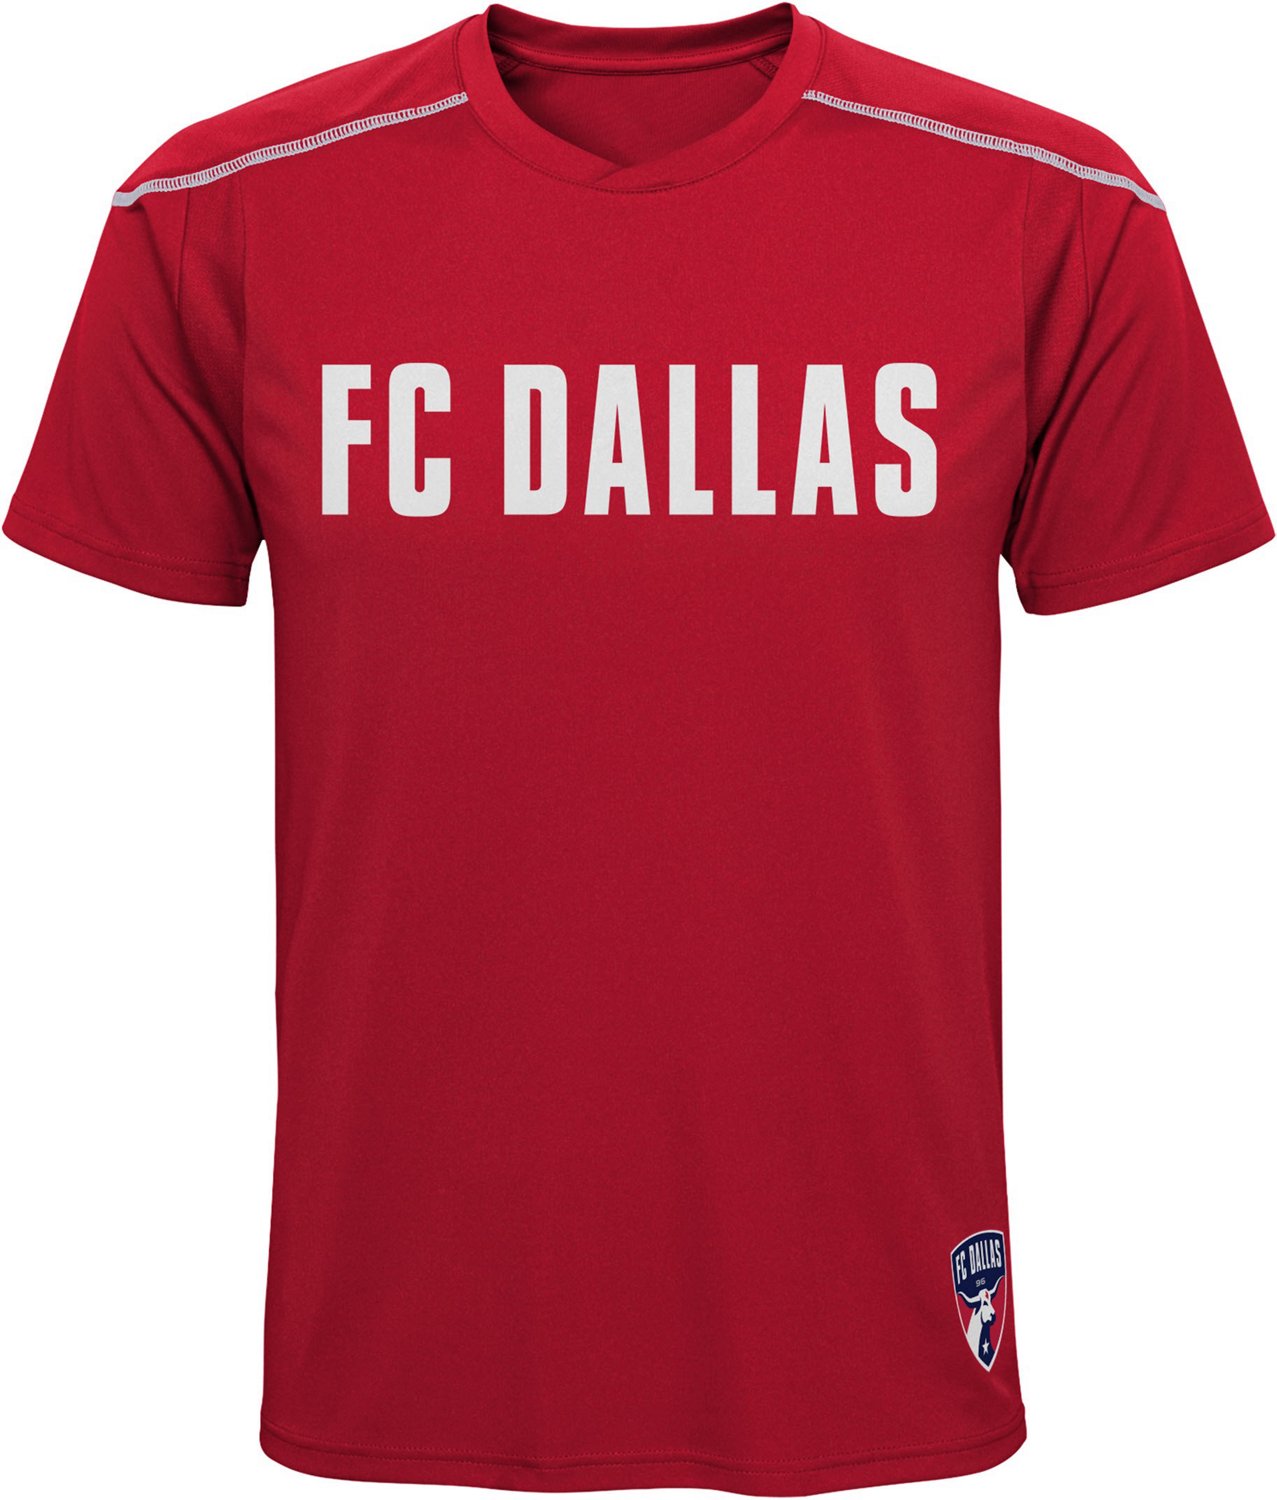 Outerstuff FC Dallas MLS Soccer Boys Youth Team Jersey Top Shirt